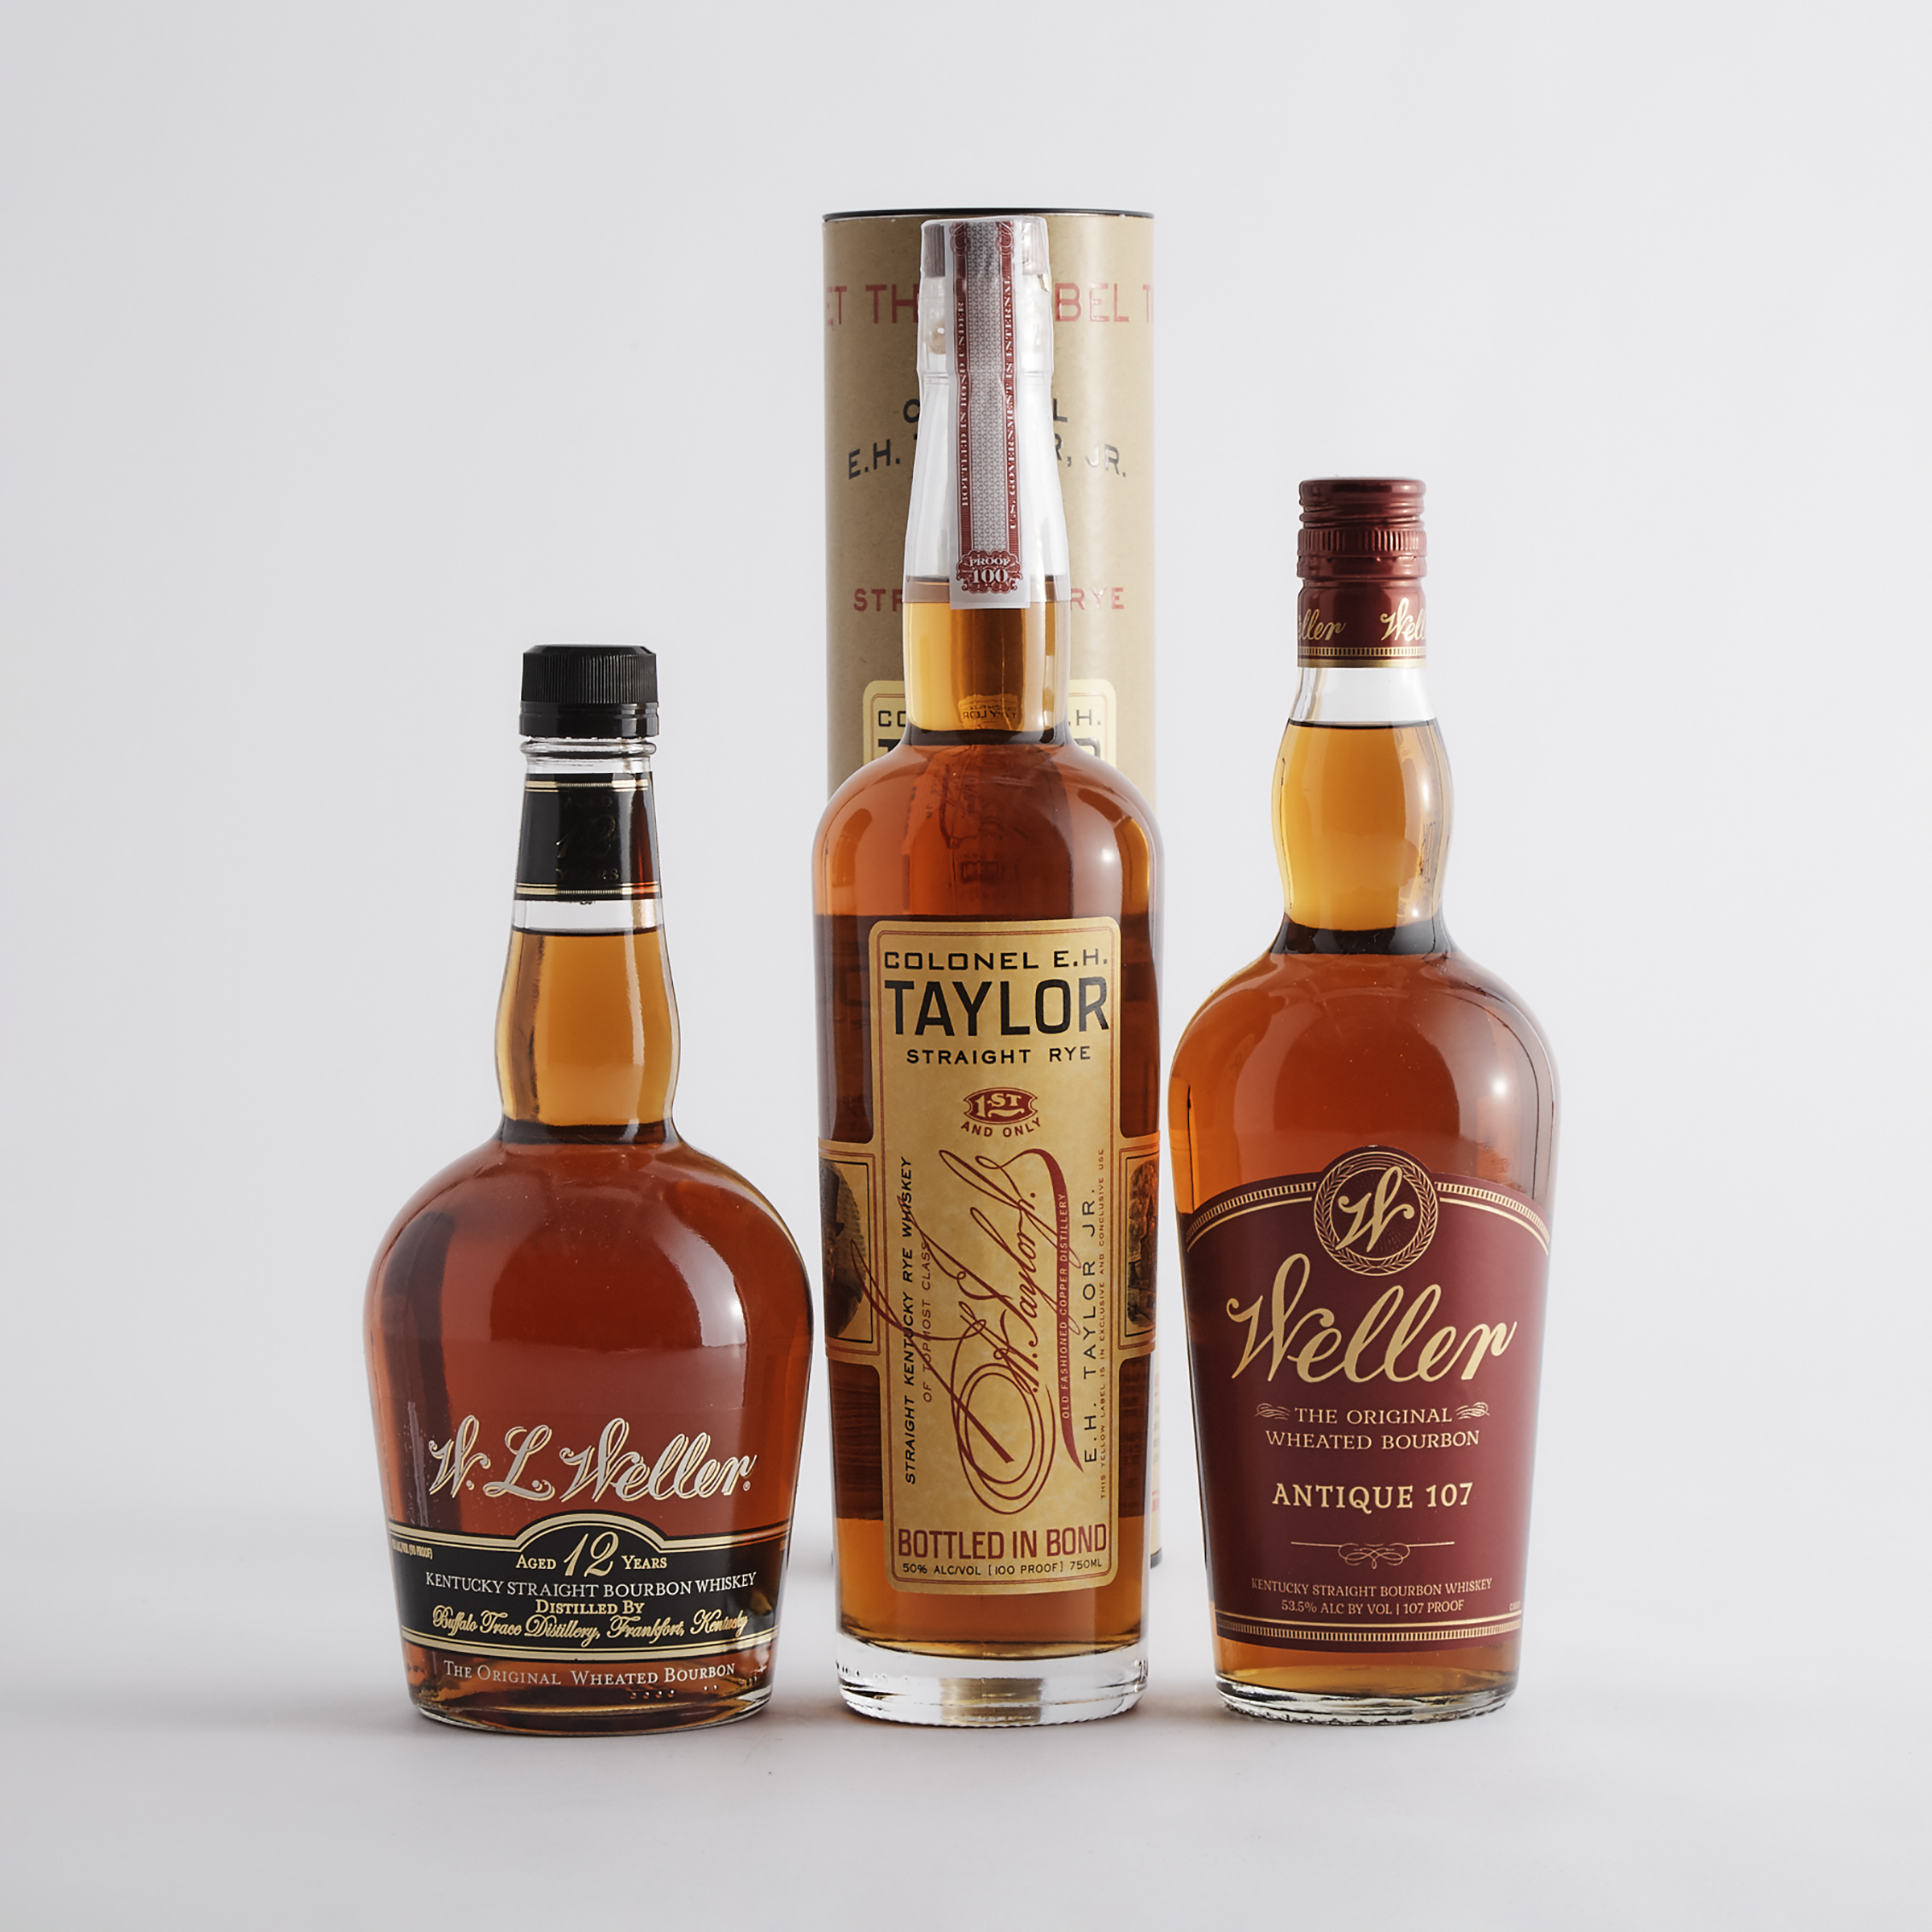 COLONEL E.H. TAYLOR JR. STRAIGHT KENTUCKY RYE WHISKEY (ONE 750 ML)
W.L. WELLER KENTUCKY STRAIGHT BOURBON WHISKEY 12 YEARS (ONE 750 ML)
WELLER ANTIQUE 107 ORIGINAL WHEATED BOURBON (ONE 750 ML)